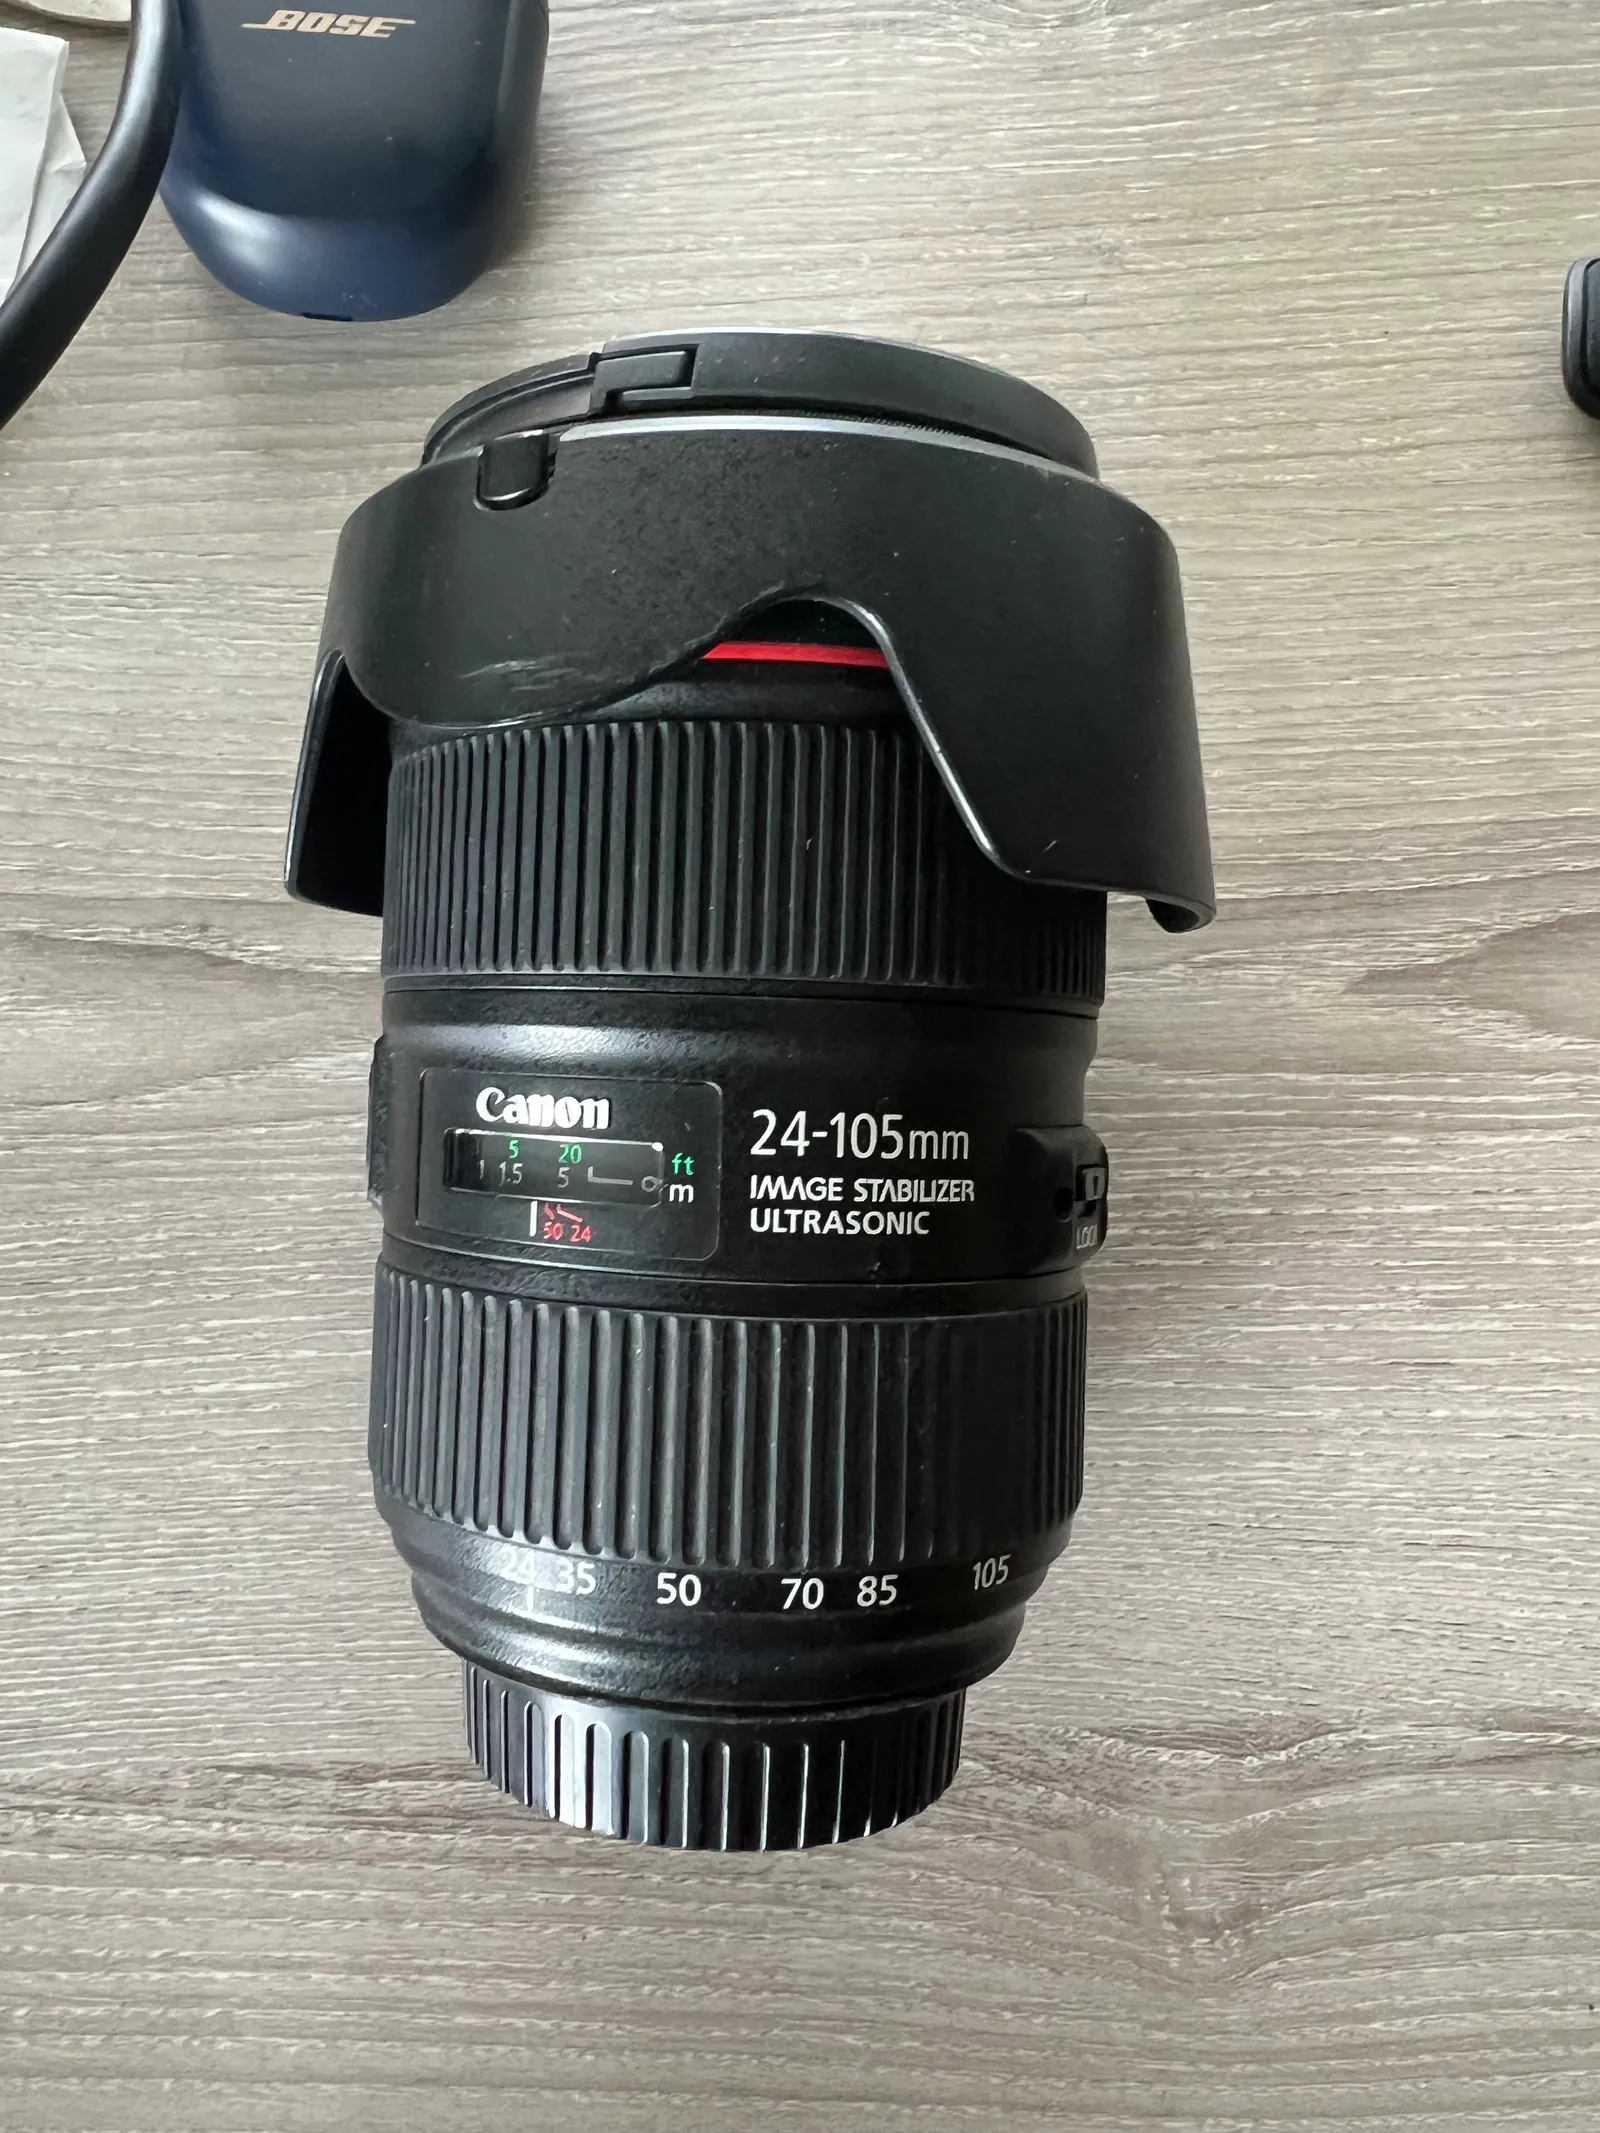 Canon EF 24-105mm f/4L IS II USM Lens From finn-wallace On Gear Focus